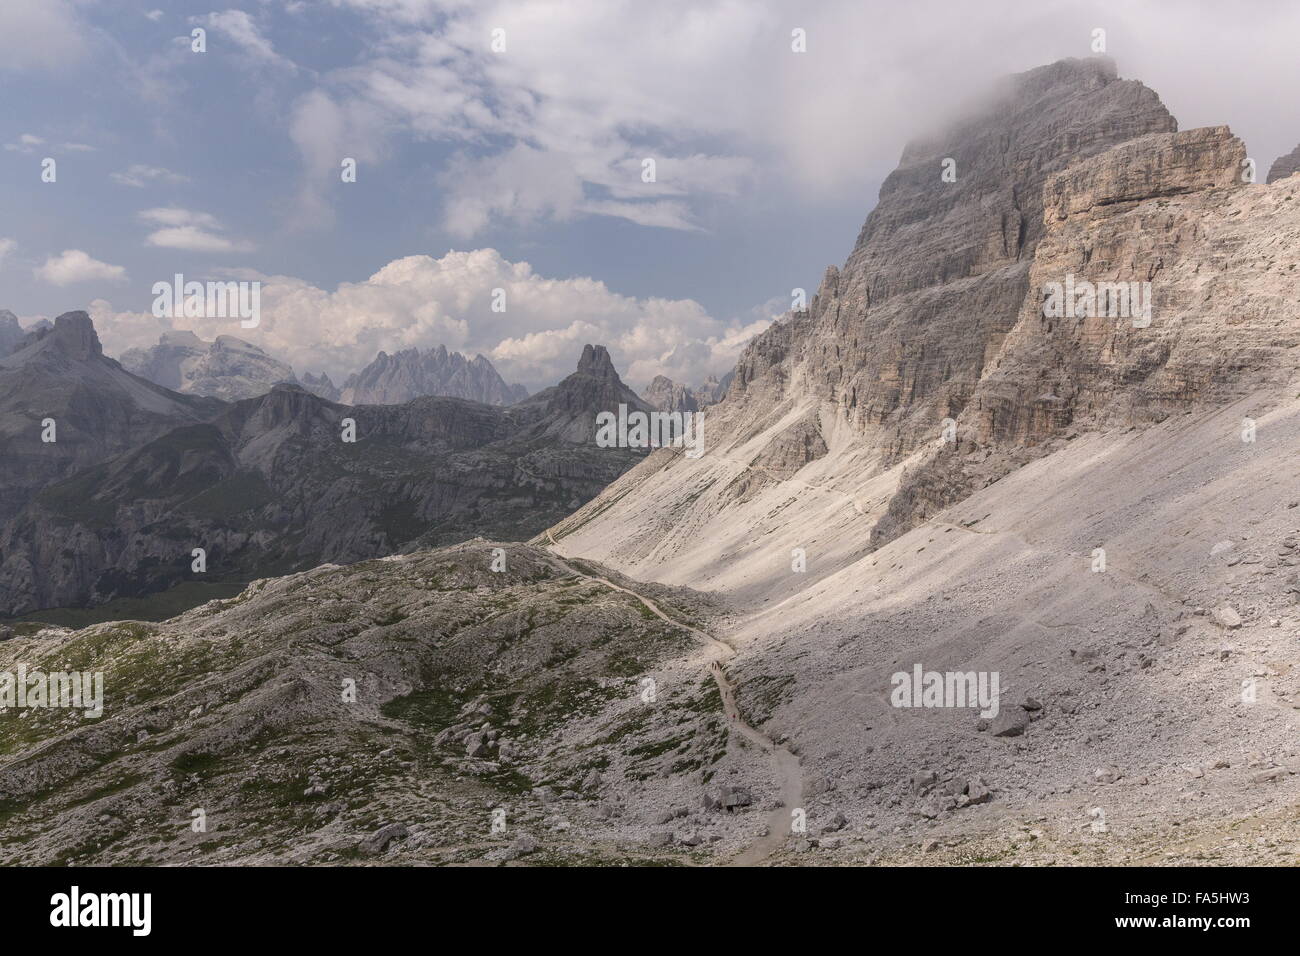 Looking north from the Drei Zinnen, in the Parco naturale Tre Cime, Dolomites, Italy Stock Photo